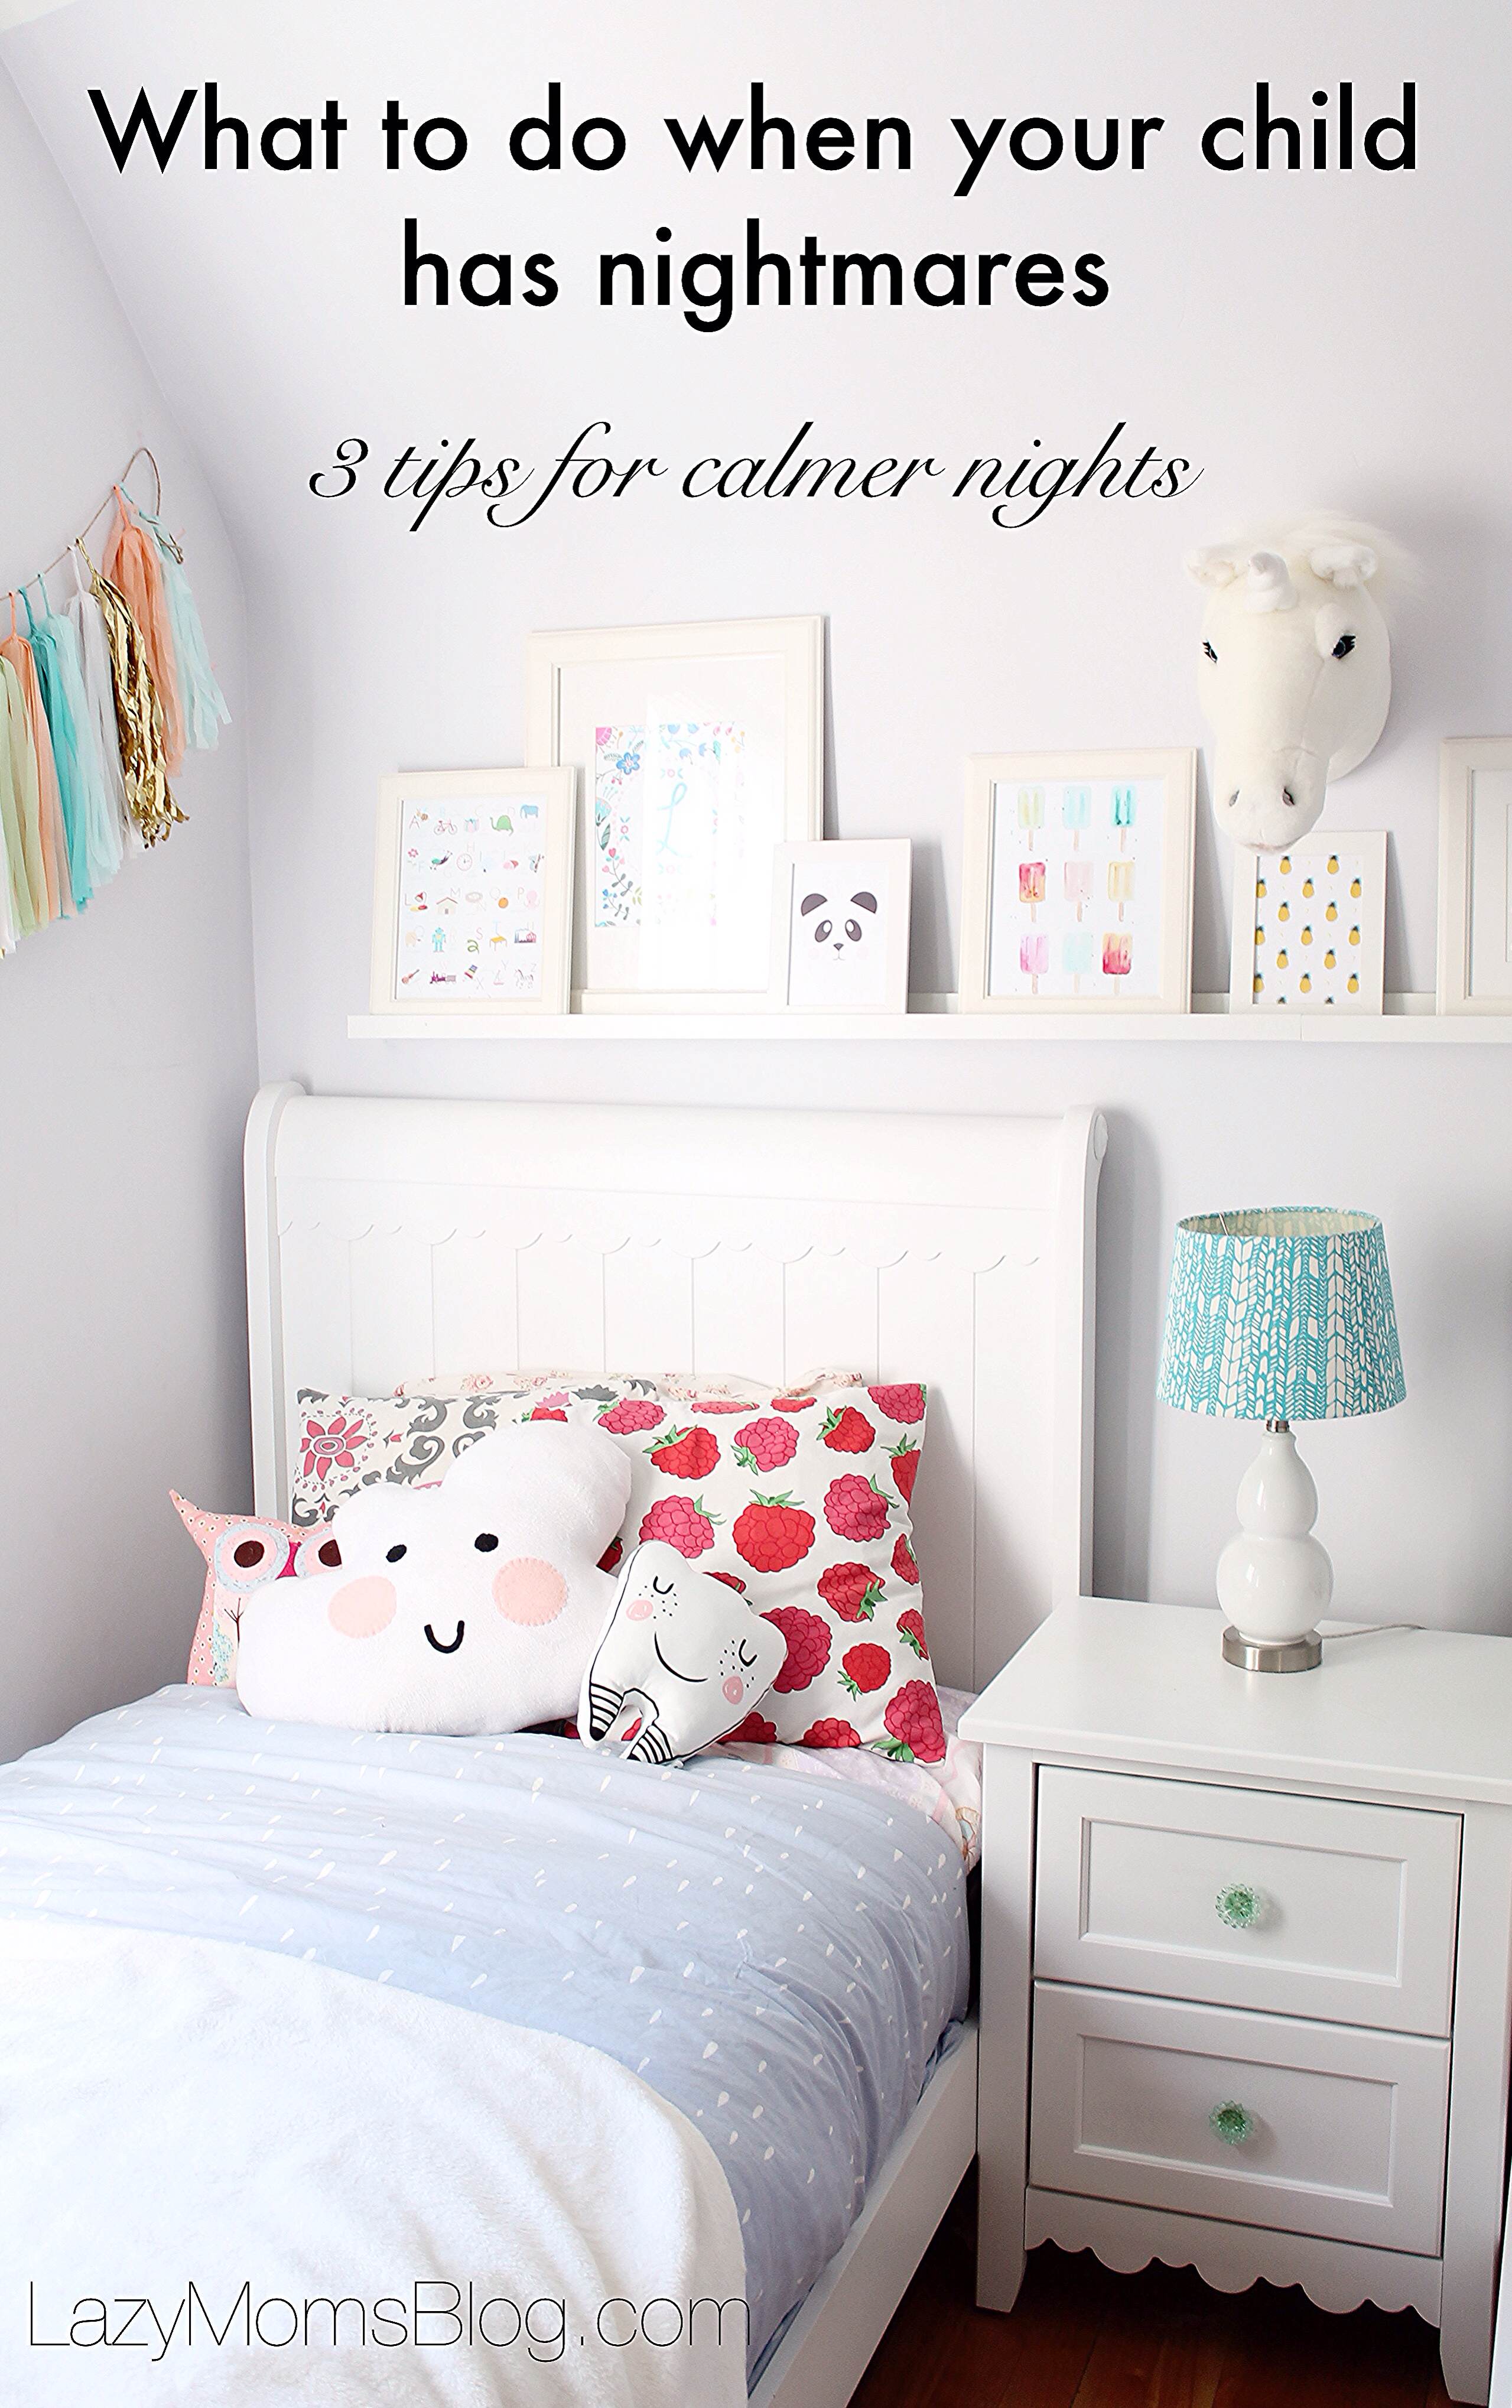 what to do when your child starts having nightmares, how to help him sleep better, and how to organize the bedroom so it'll be calming and relaxing! 